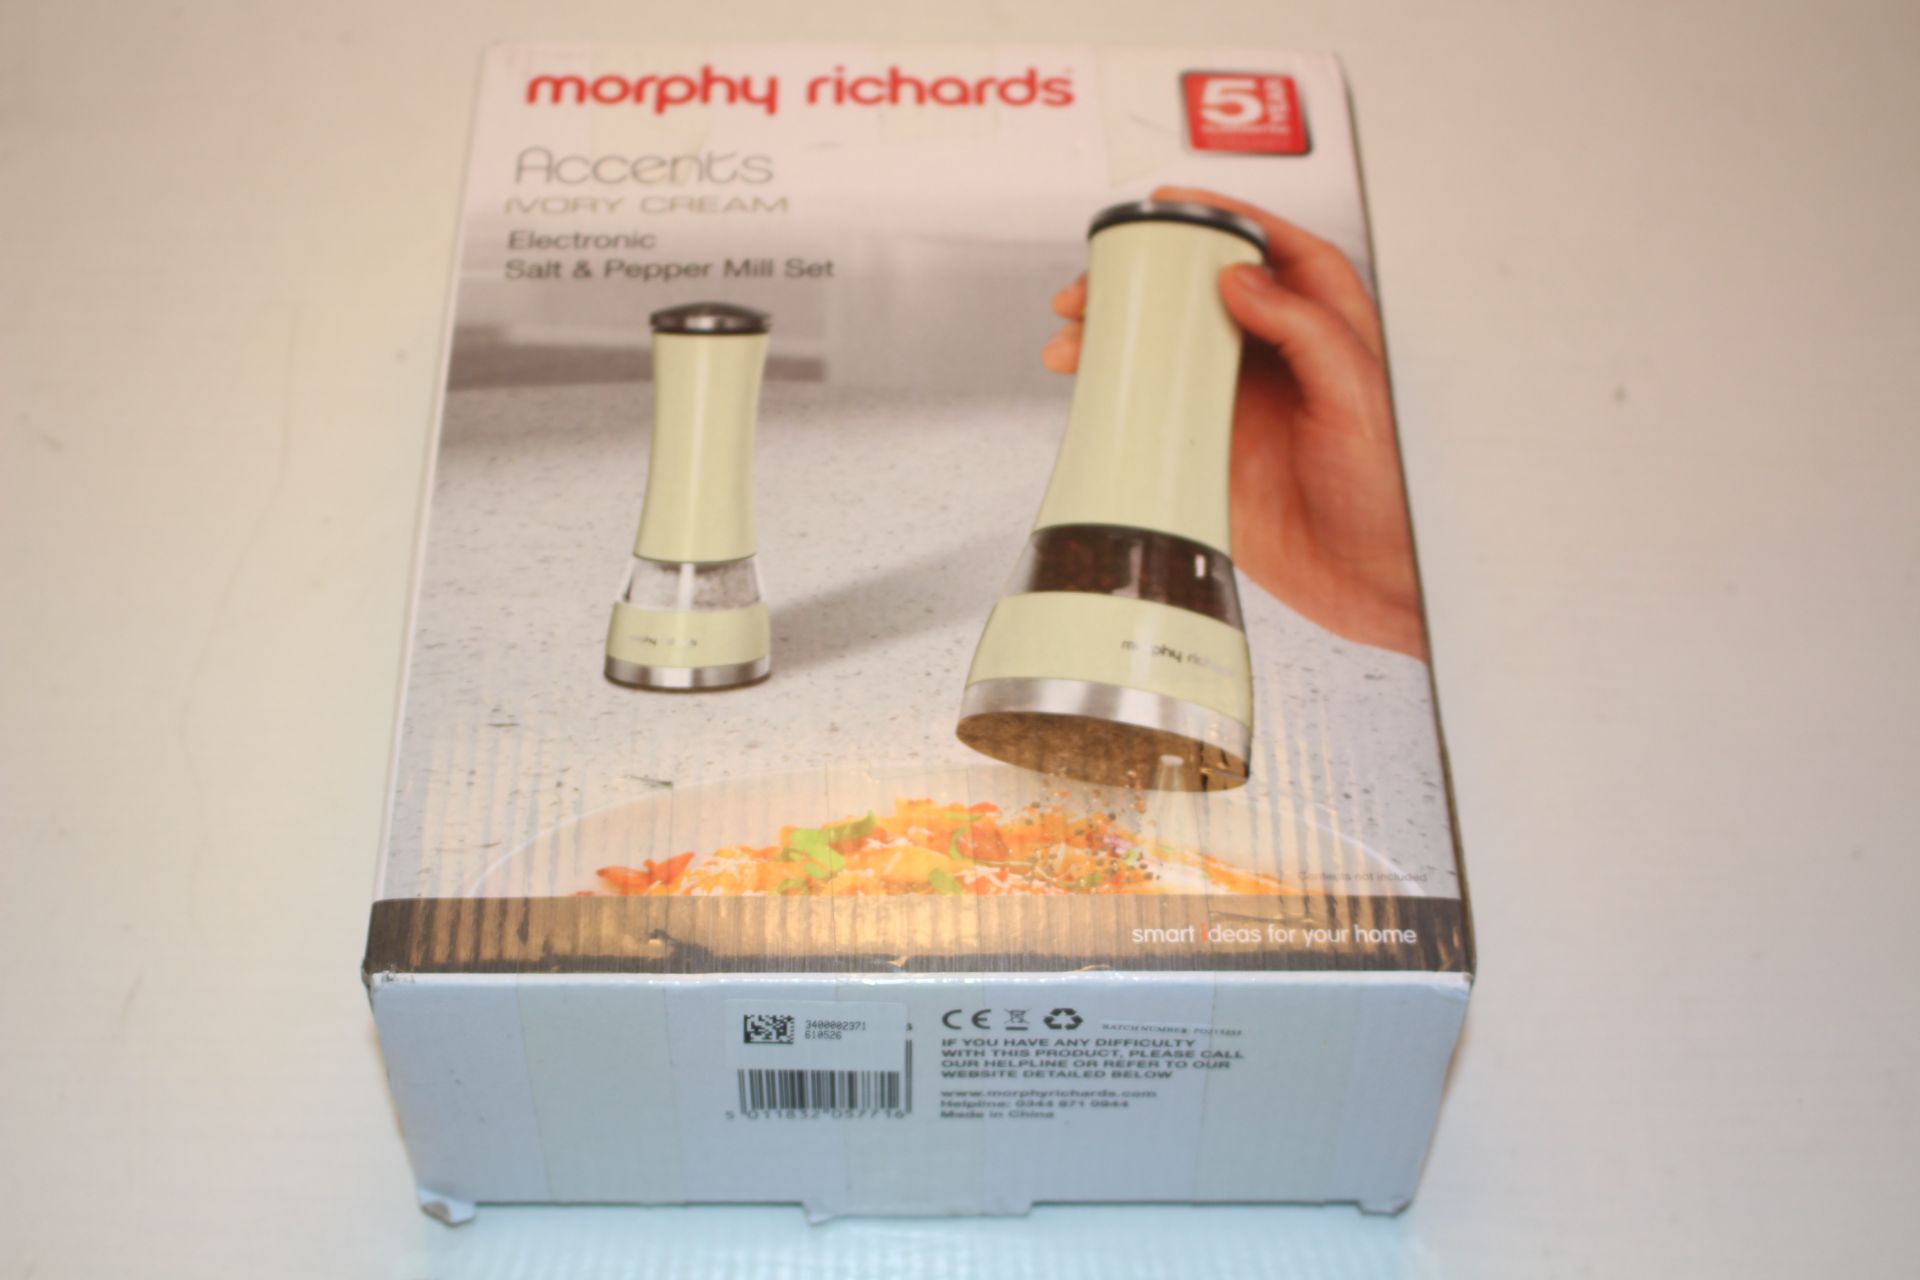 BOXED MORPHY RICHARDS ACCENTS IVORY CREAM ELECTRONIC SALT & PEPPER MILL SET RRP £29.99Condition